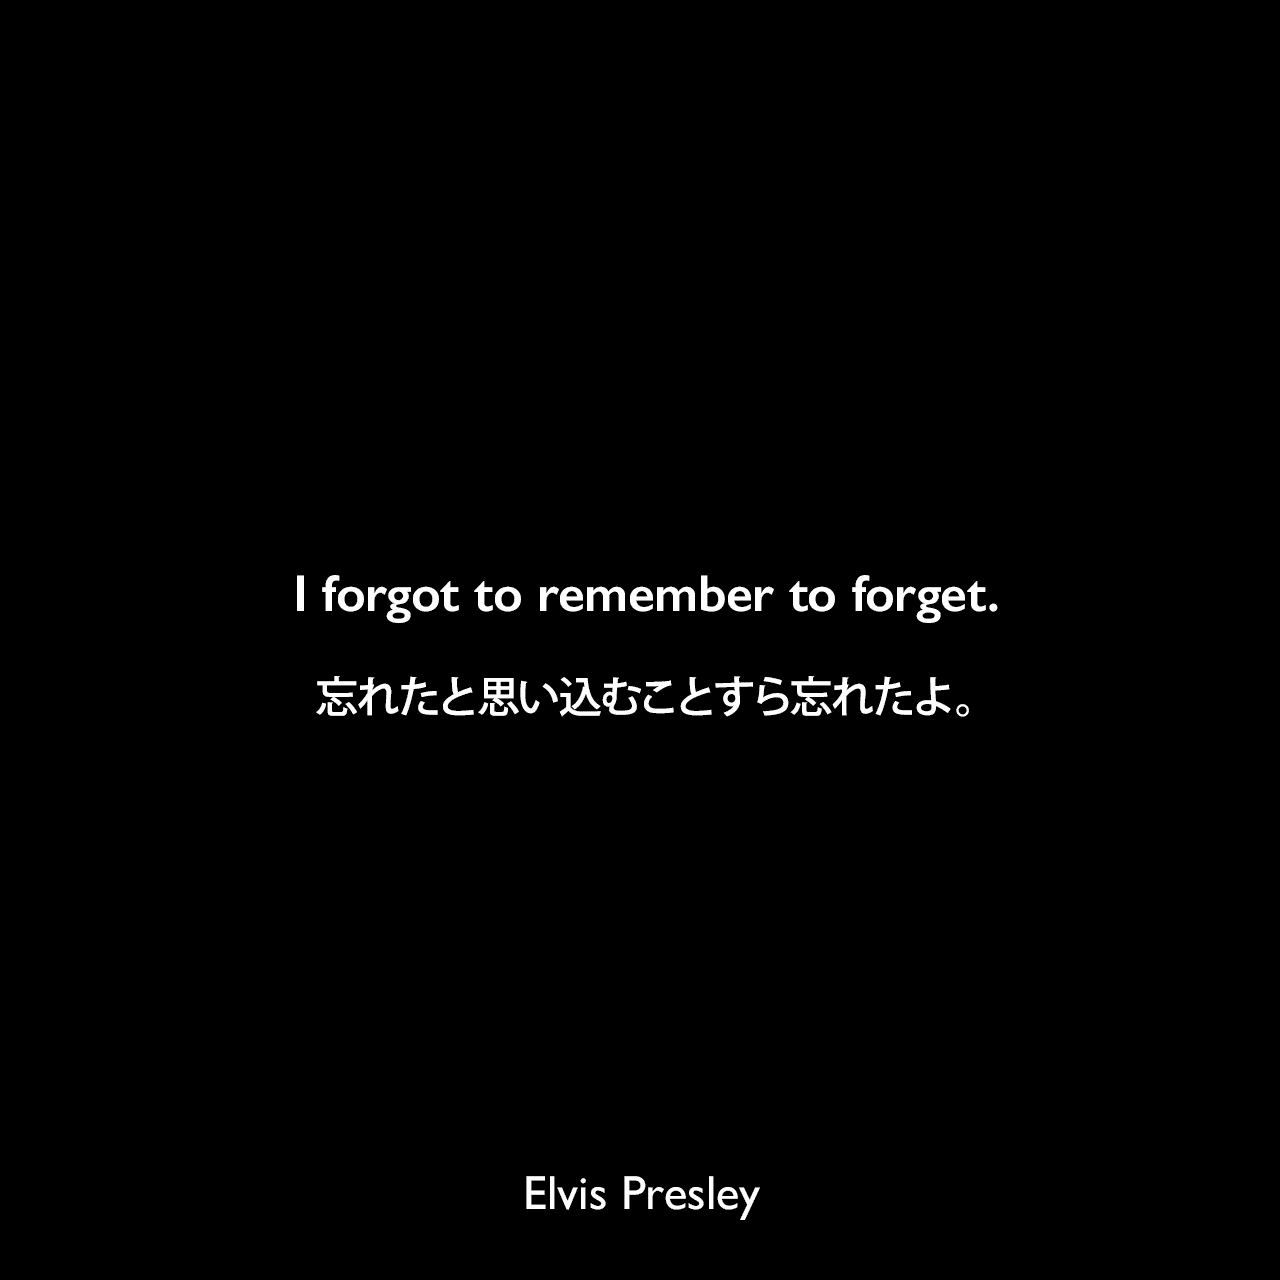 I forgot to remember to forget.忘れたと思い込むことすら忘れたよ。- プレスリーの曲「I forgot to remember to forget」よりElvis Presley